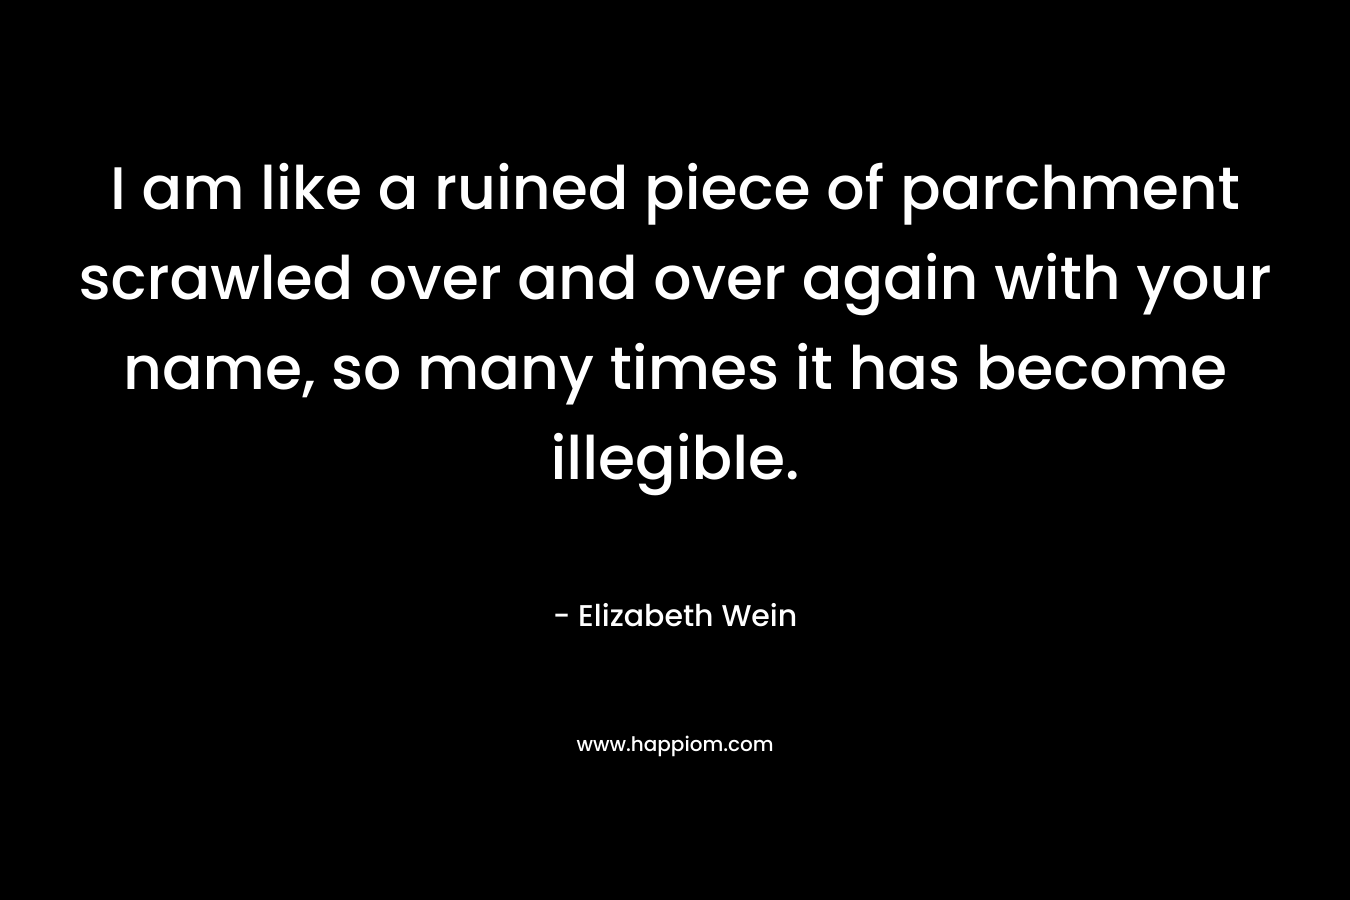 I am like a ruined piece of parchment scrawled over and over again with your name, so many times it has become illegible. – Elizabeth Wein